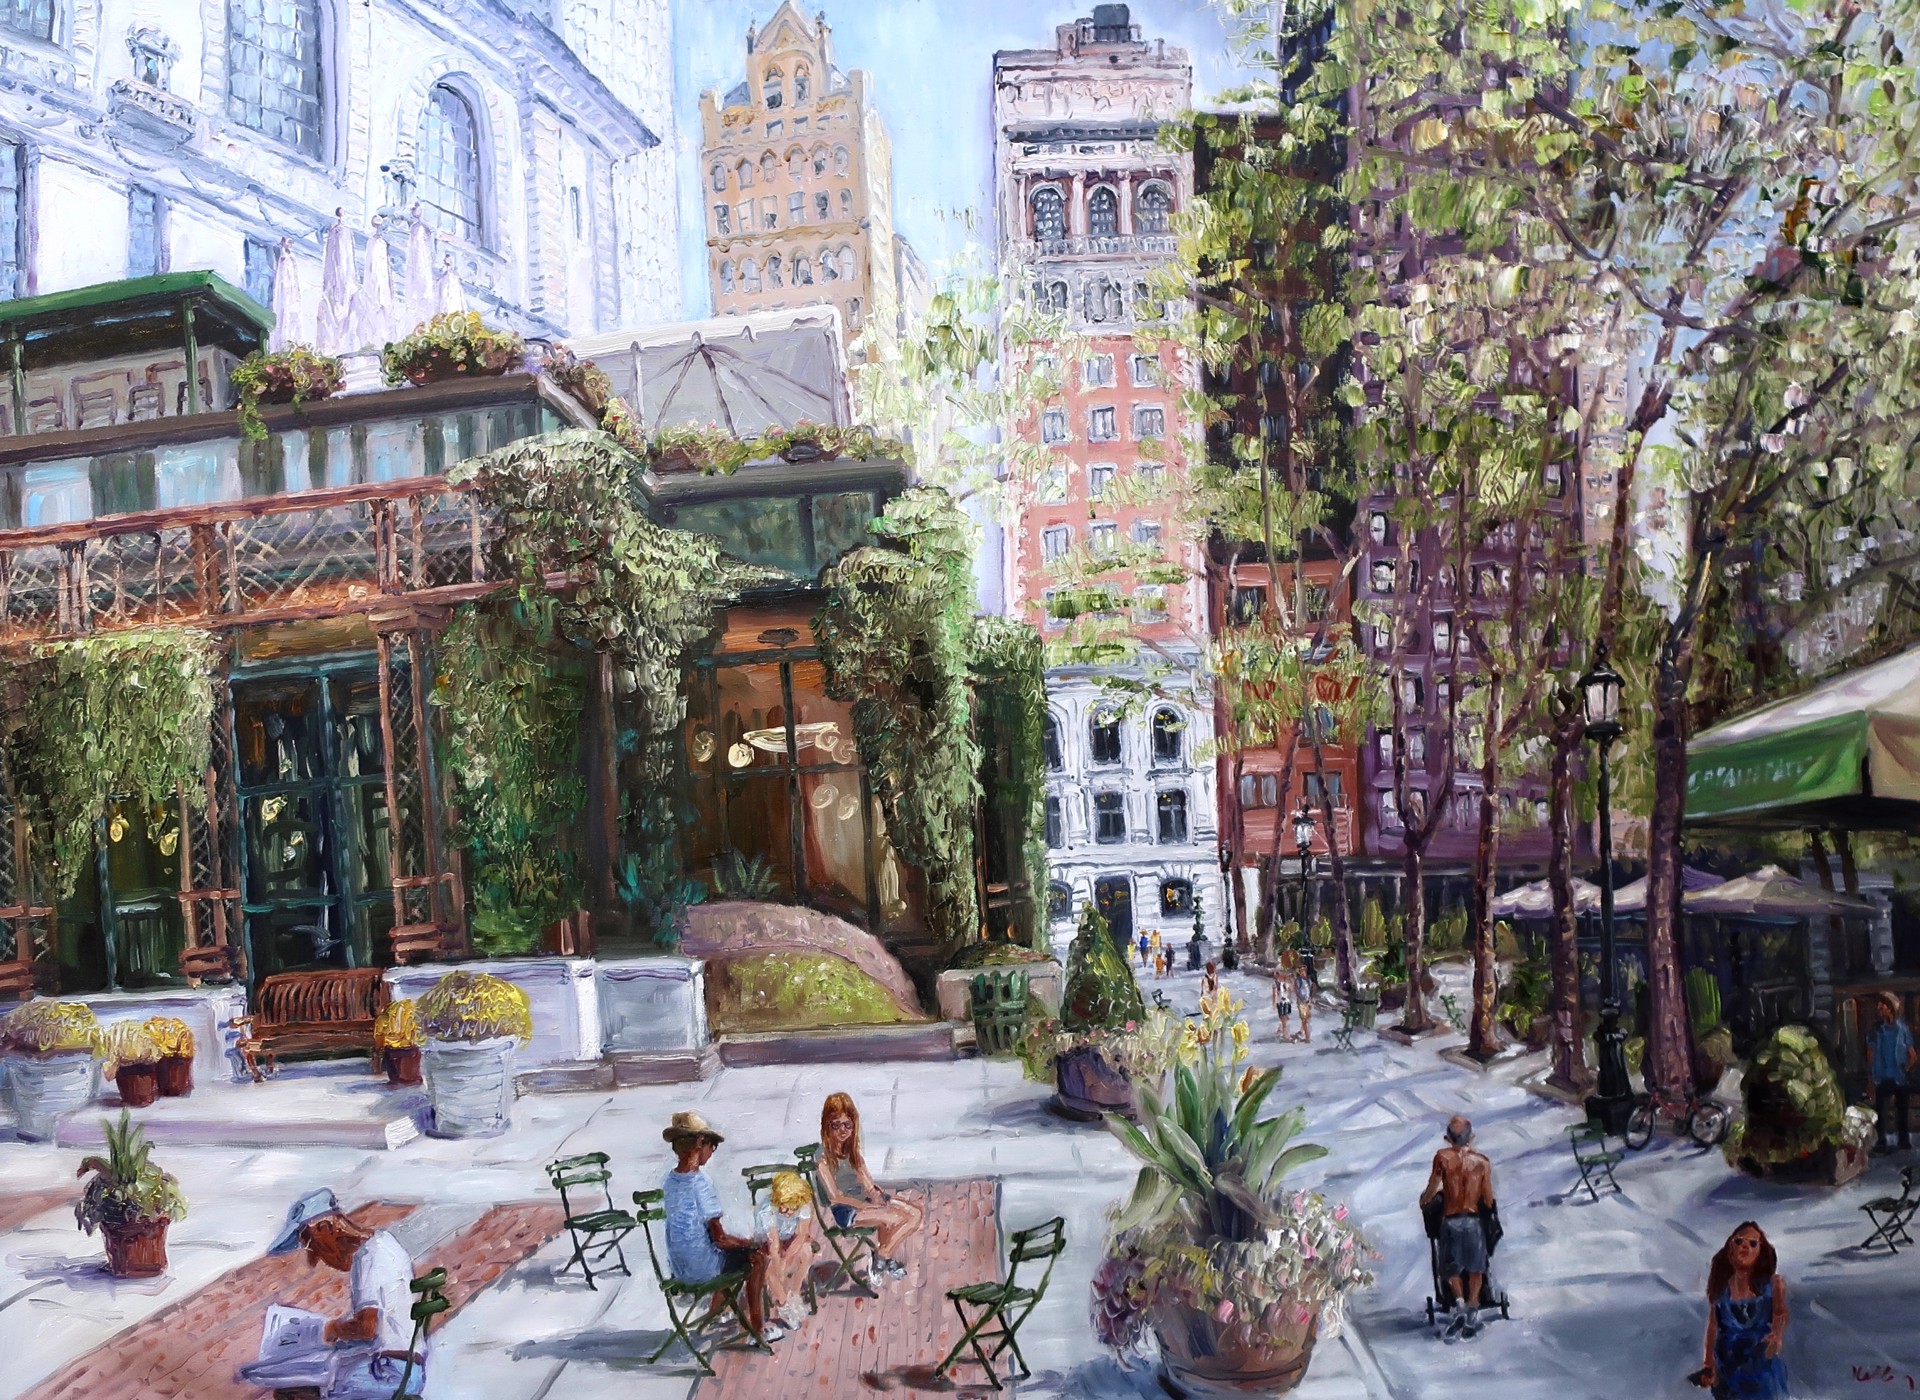  BRYANT PARK NYC  by TED KELLER